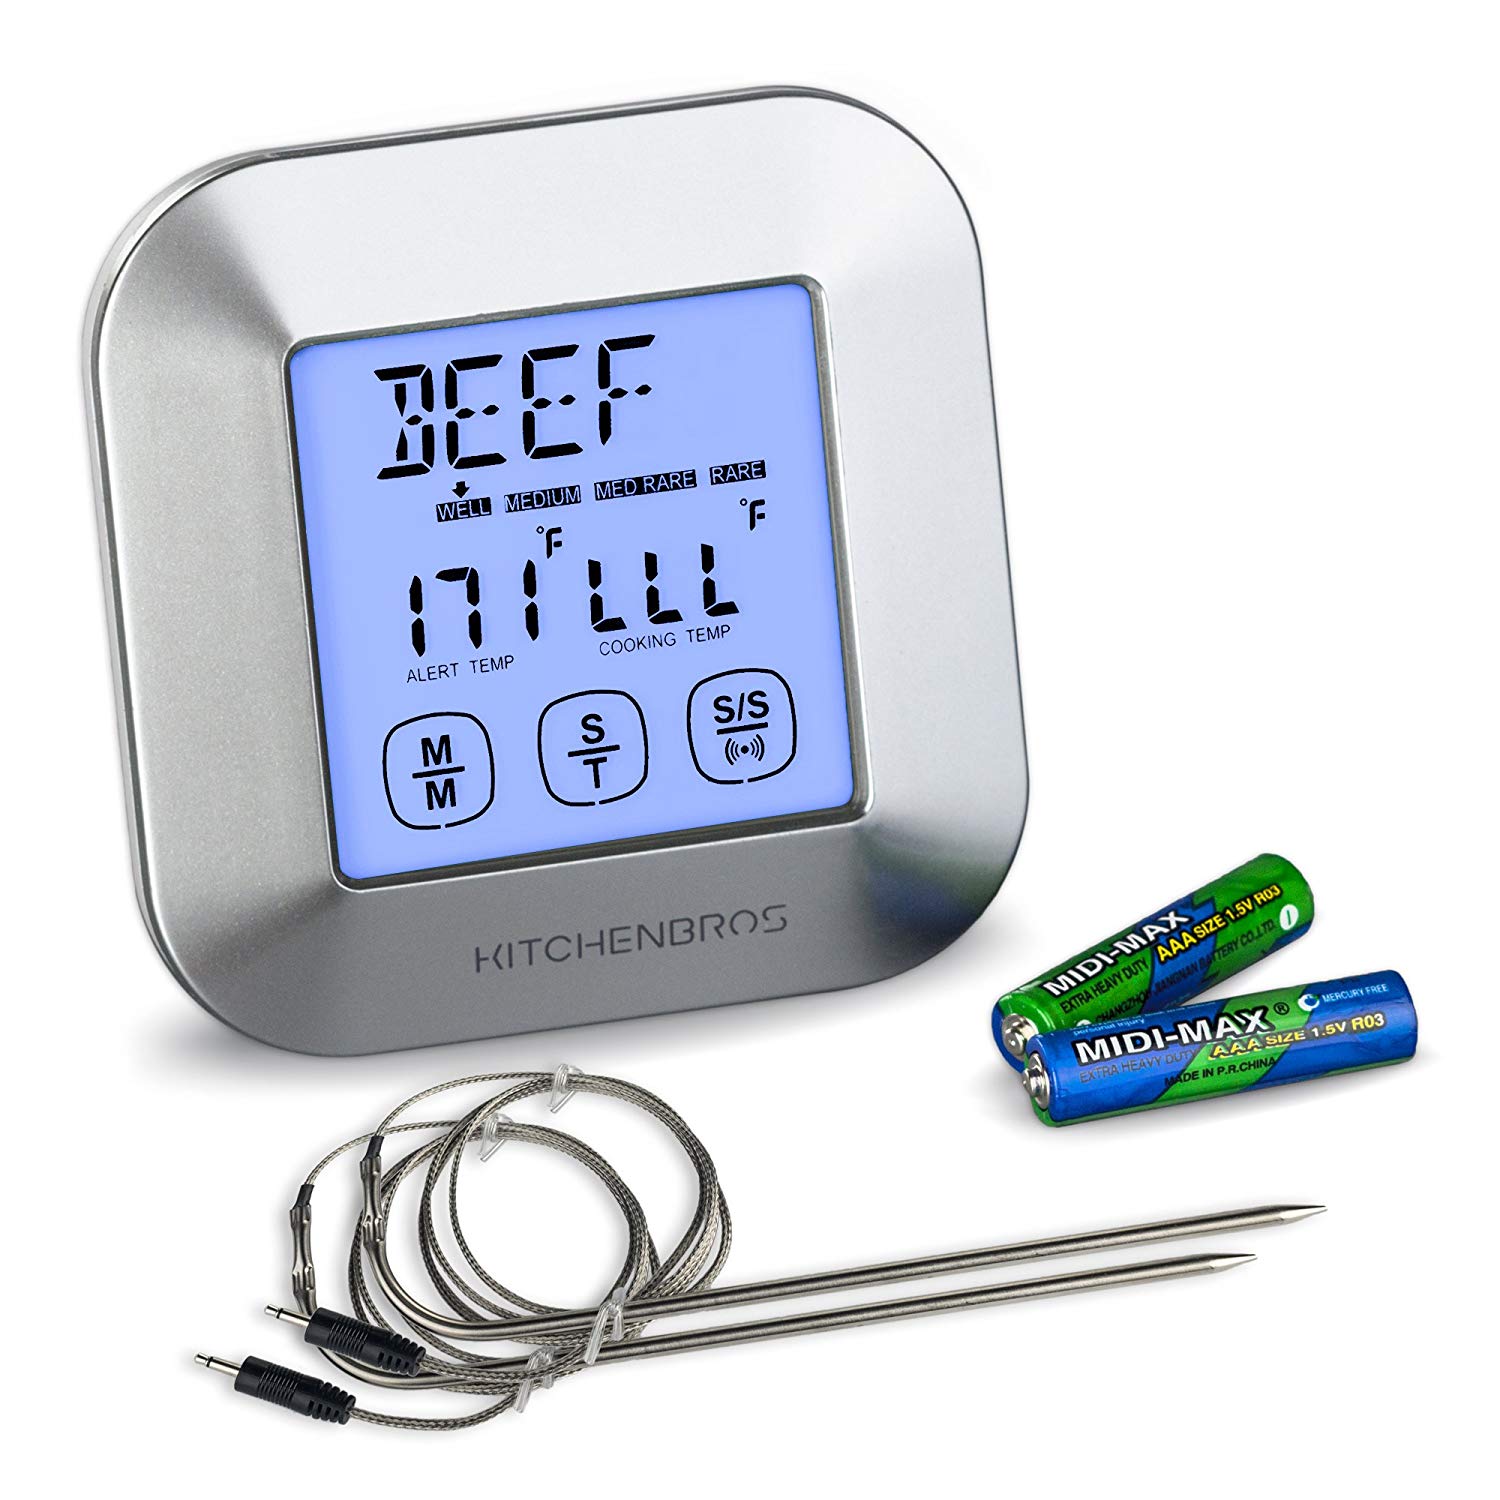 KitchenBros Digital Food Thermometer Instant Read For Cooking Meat BBQ Turkey And Steak Grill Oven Smoker Safe With Alarm Timer 2 Stainless Steel Probe AAA Batteries Included